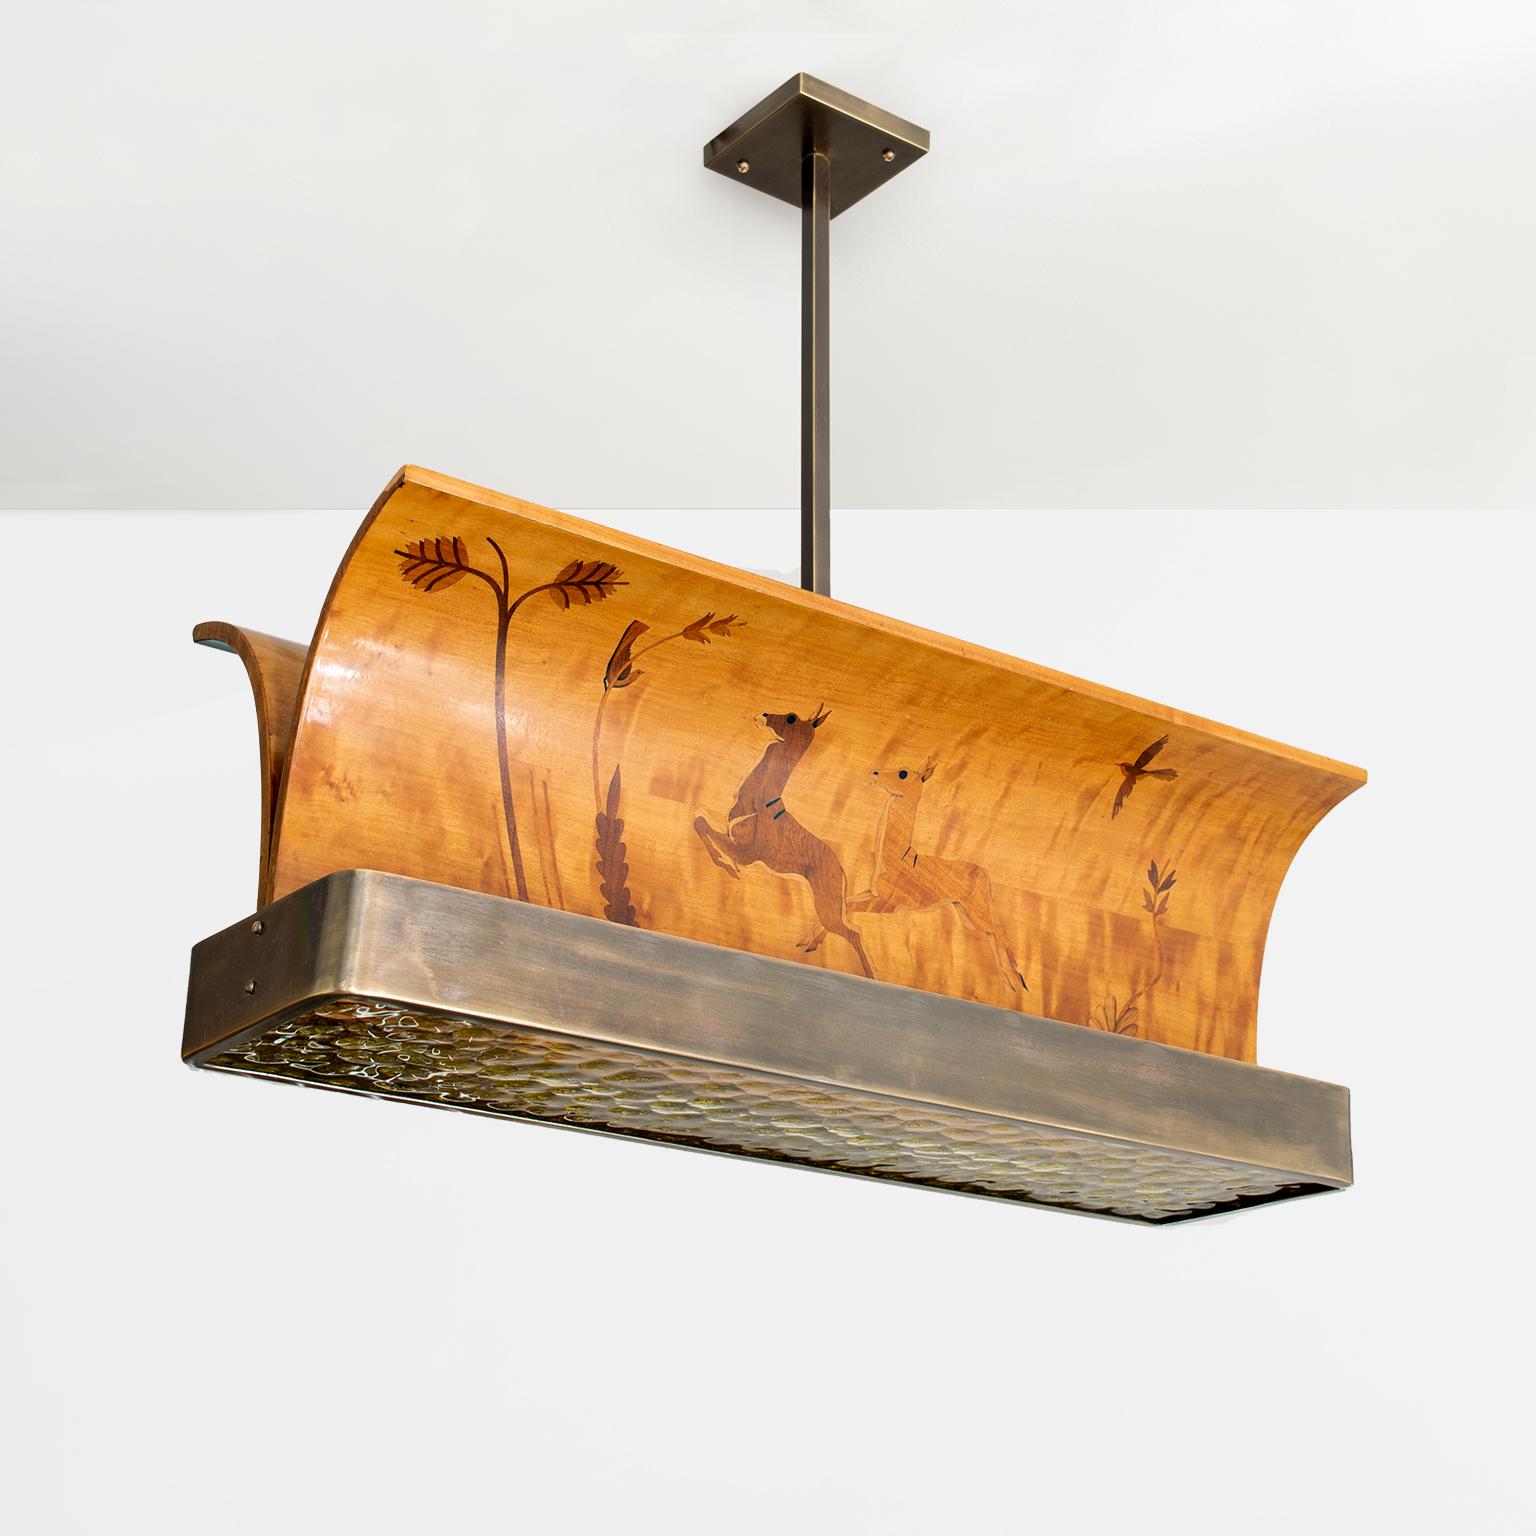 Scandinavian Modern marquetry wood and patinated brass pendant produced by Reiners Möbler, Mjölby, Sweden. The fixture has been completely restored and re-wired with four candelabra base sockets which are set above the original textured glass